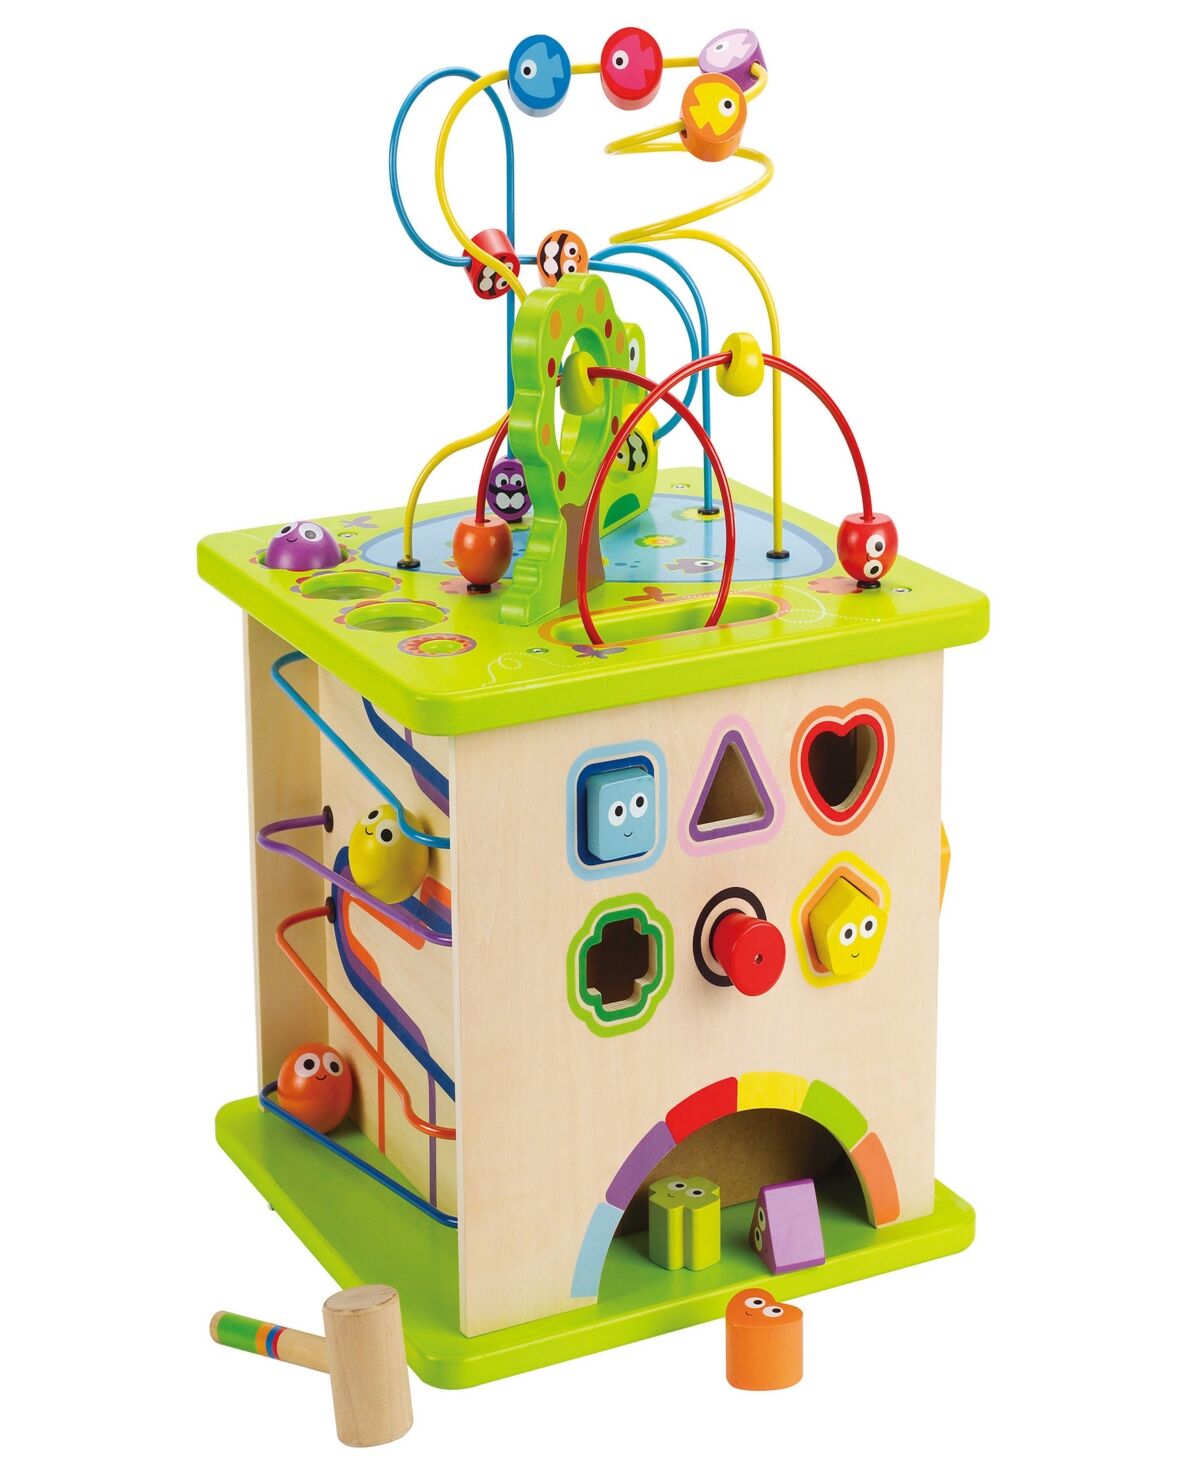 Hape Country Critters 5-Sided Play Cube Puzzle Toy - Multi